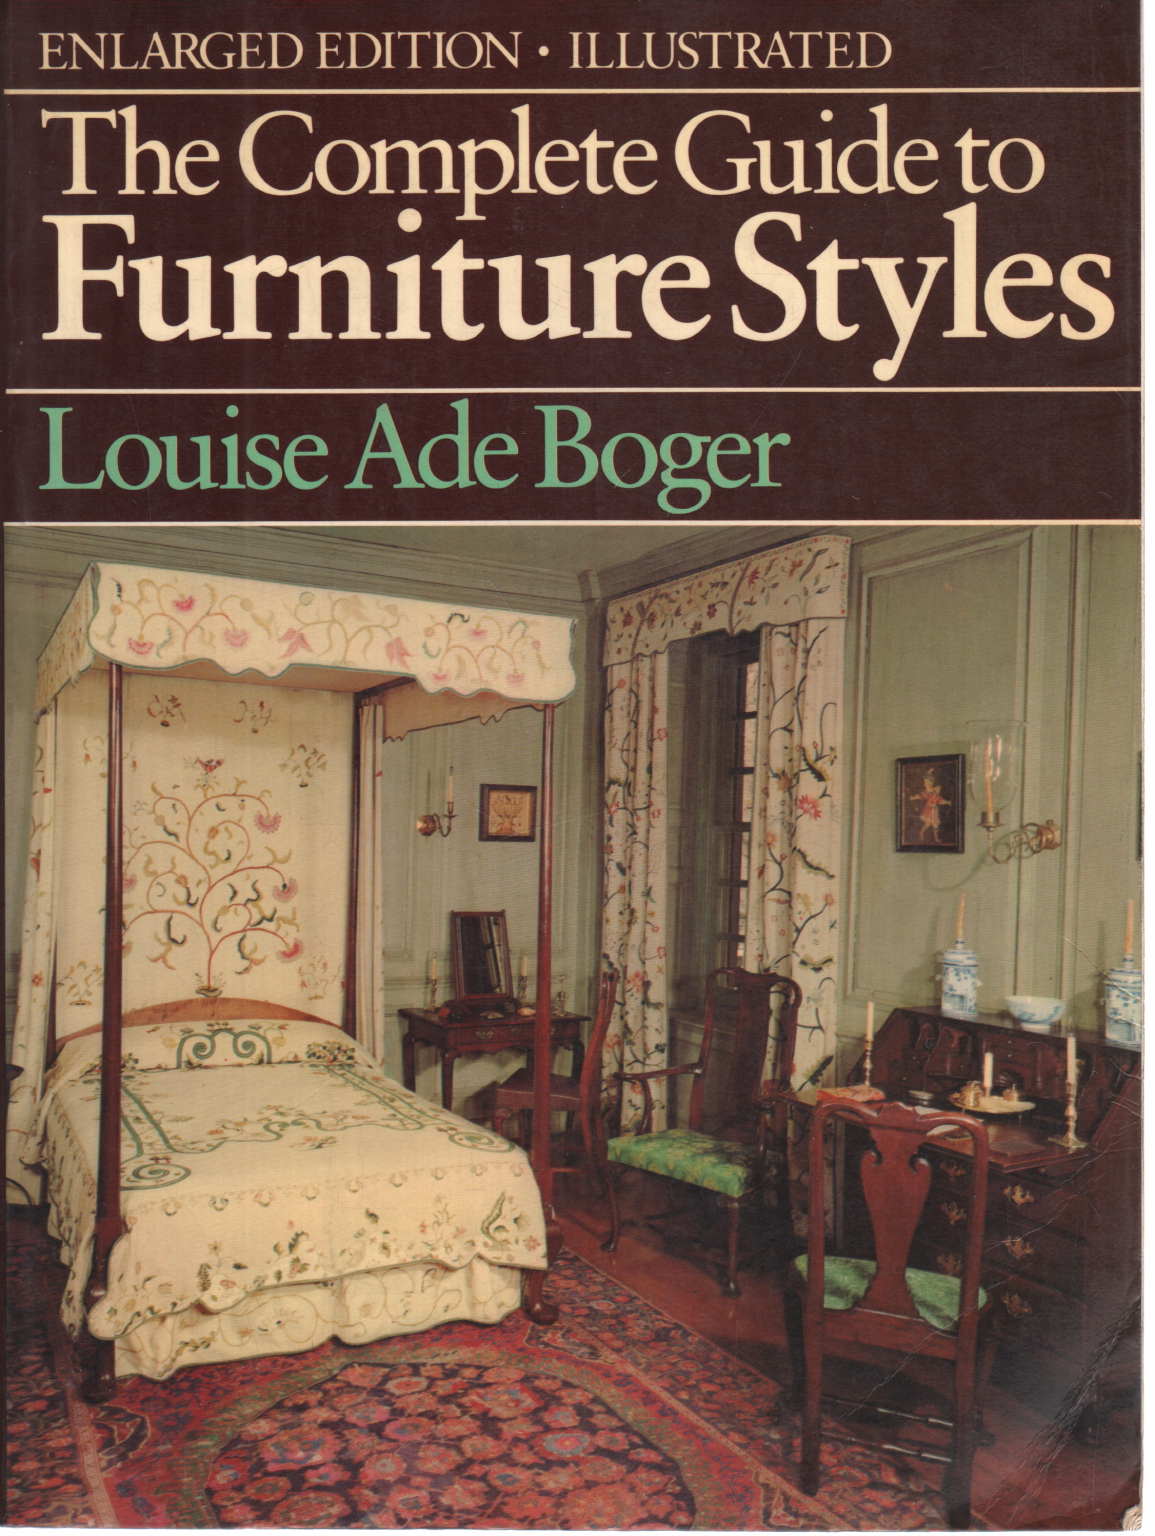 The complete guide to furniture styles, Louise Ade Boger